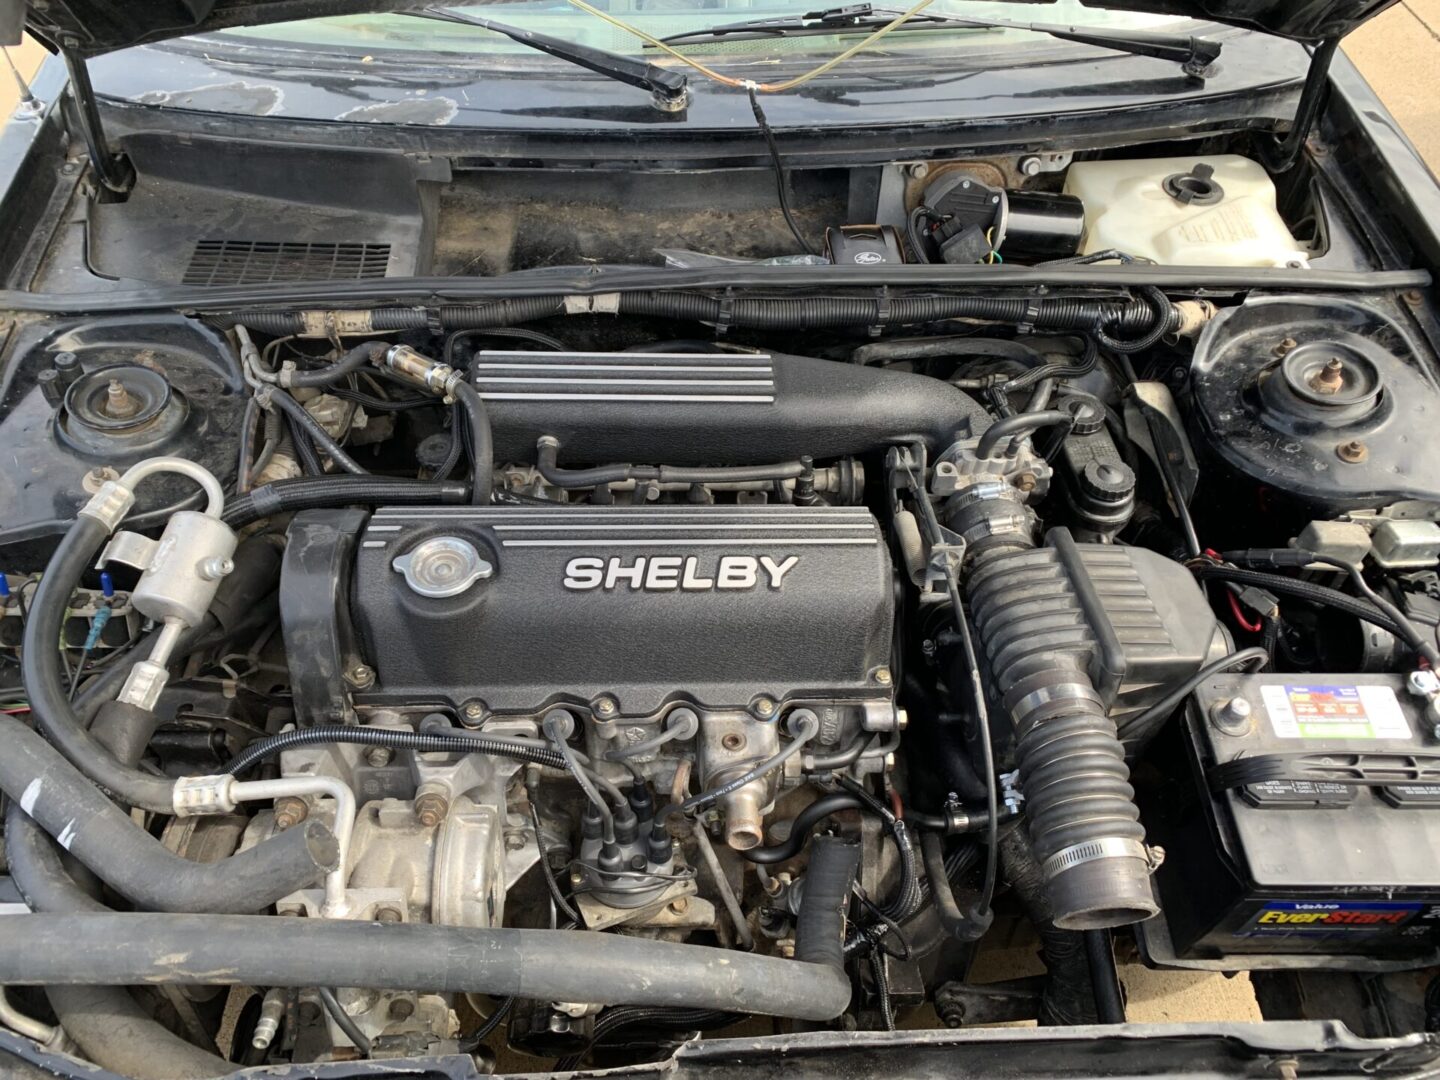 The shelby Custom fabricayed auto parts